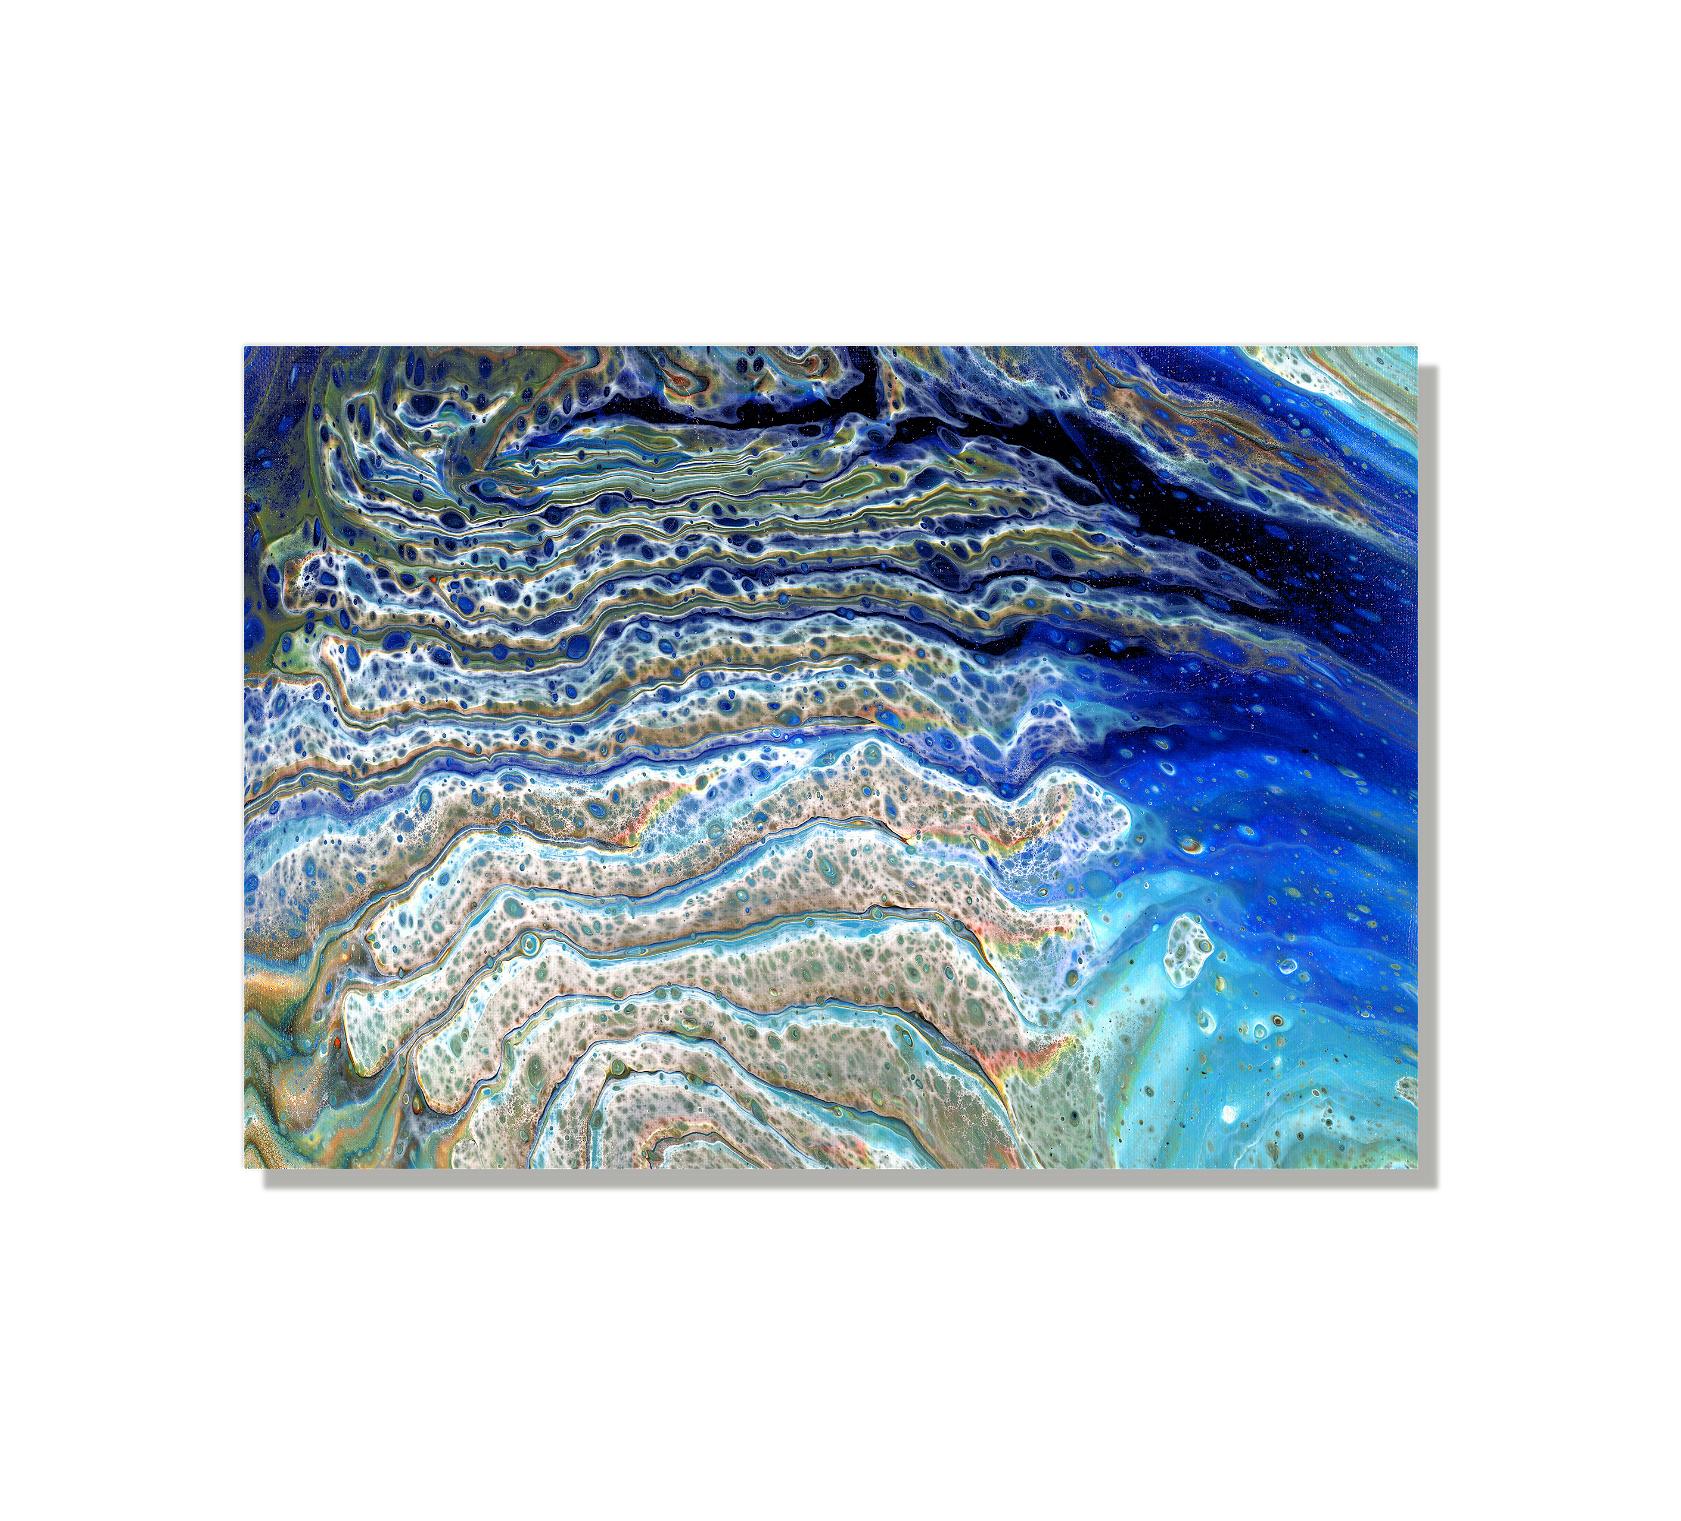 This contemporary abstract painting is printed on lightweight metal composite and will arrive ready to hang. The automotive high-gloss clear coat offers both UV protection and high-end modern finish. This vibrant composition can be hung both indoor